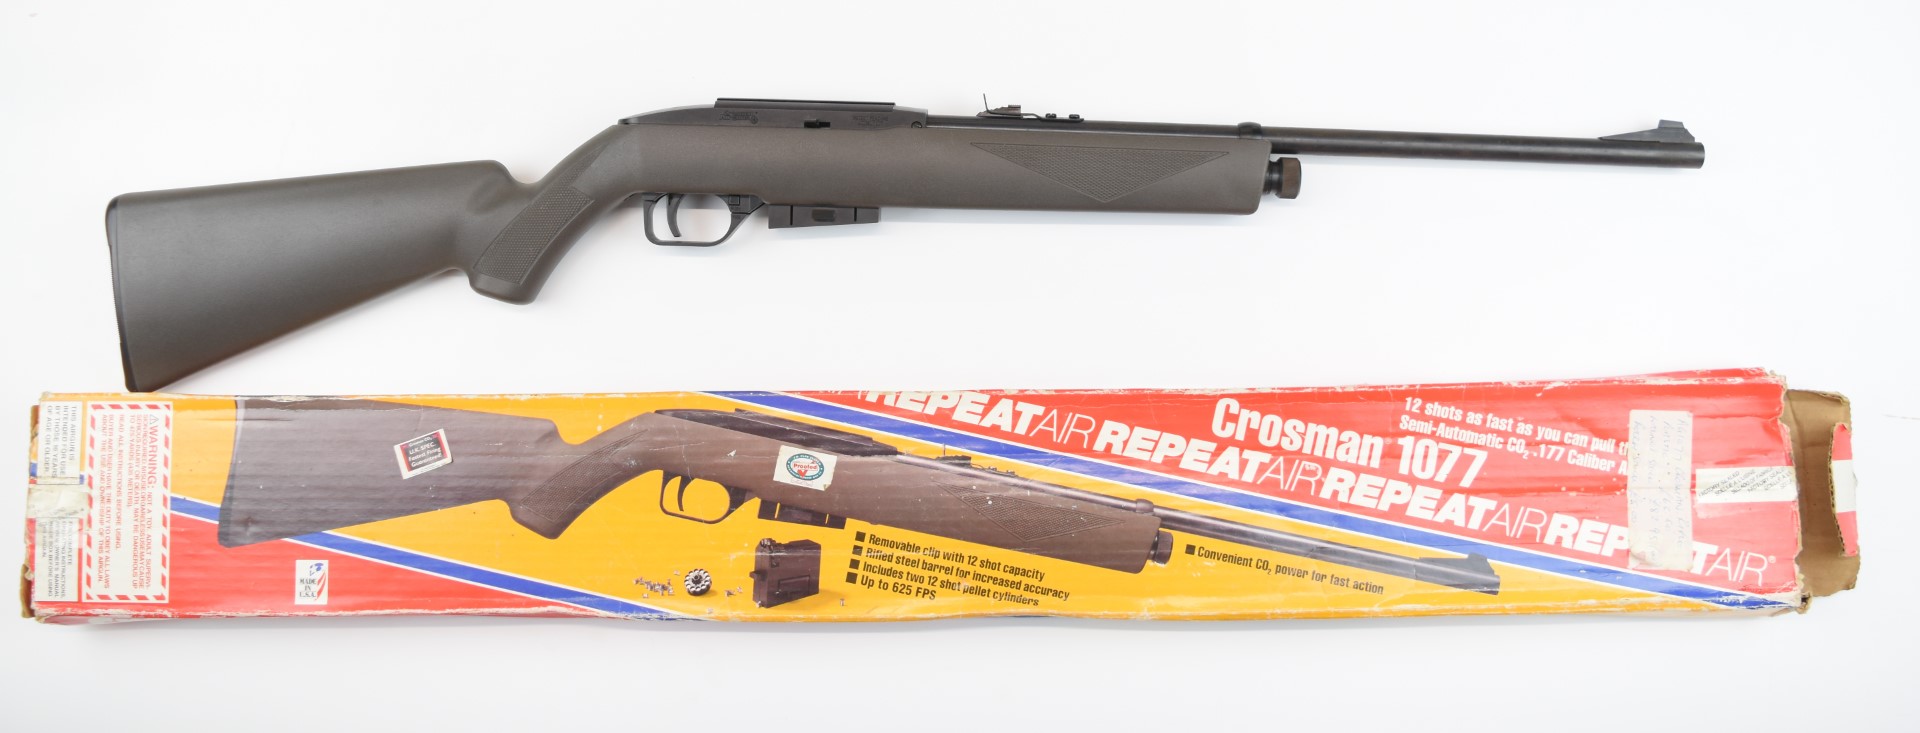 Crosman Model 1077 repeater .177 CO2 air rifle with chequered semi-pistol grip, composite stock, - Image 2 of 18